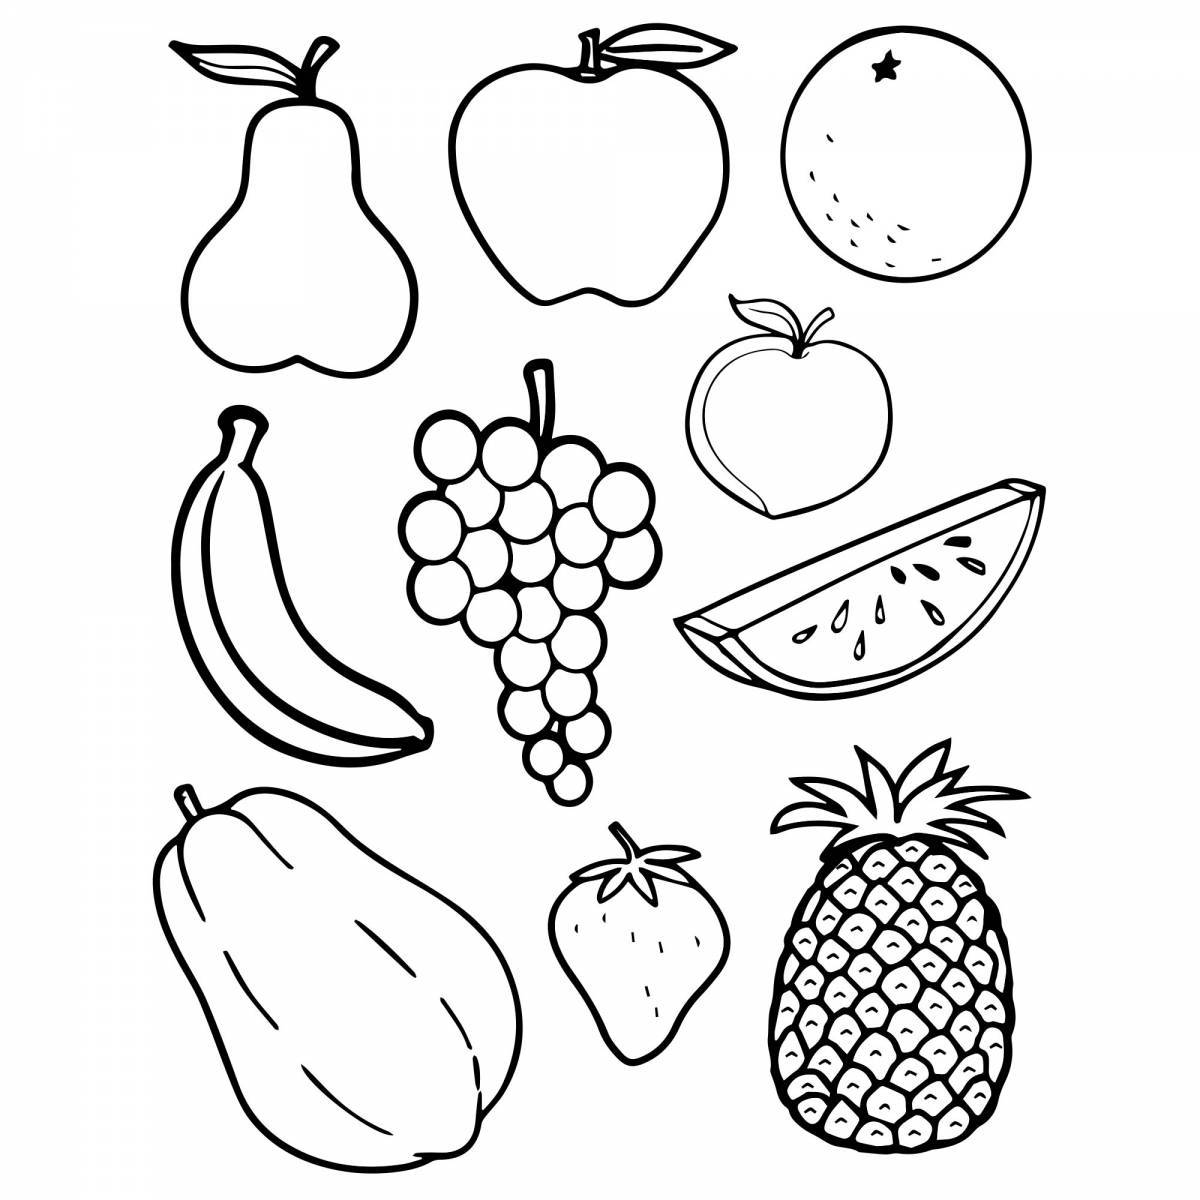 Fruits and vegetables #3